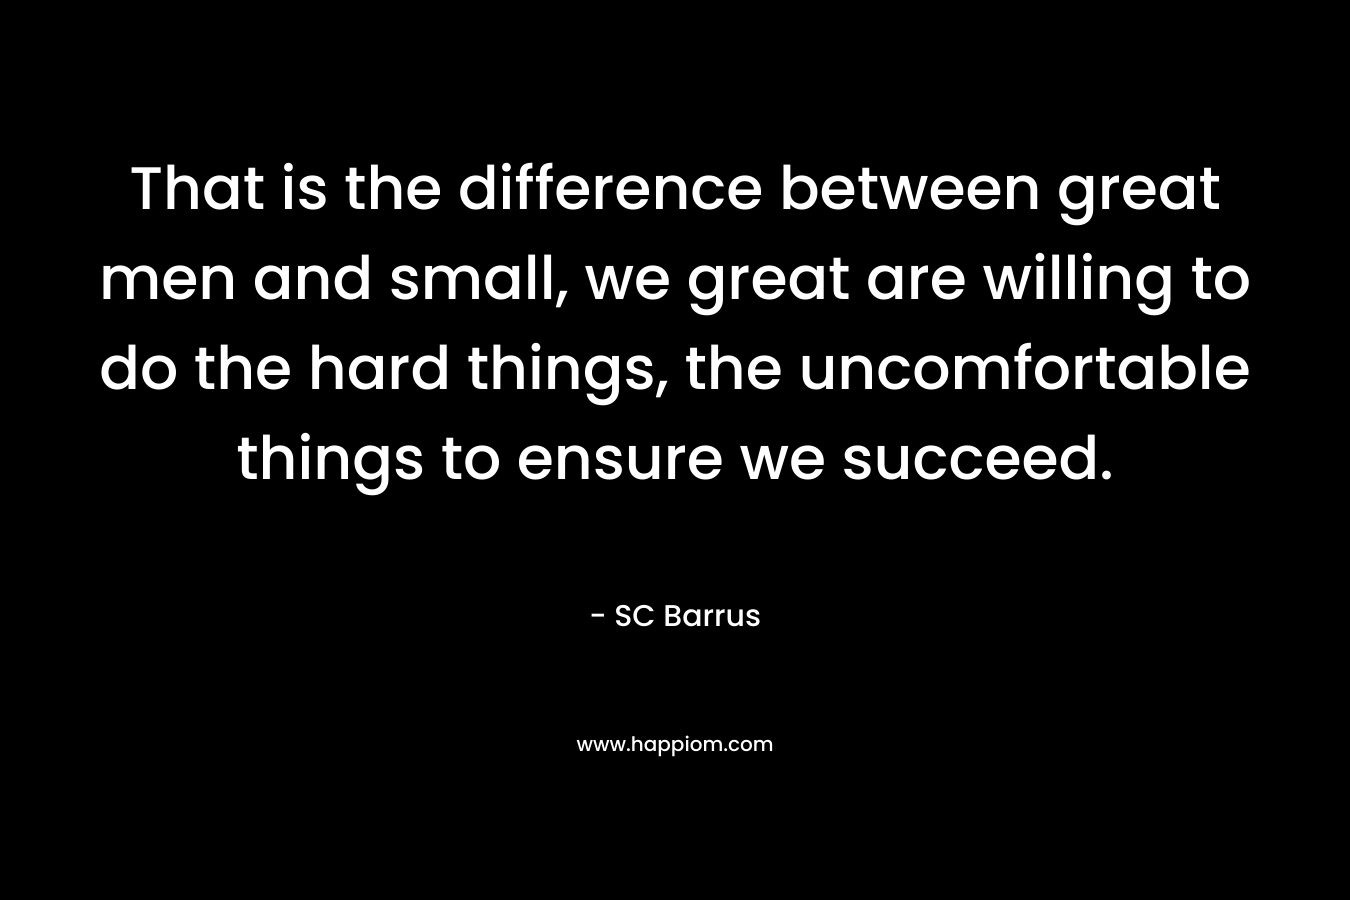 That is the difference between great men and small, we great are willing to do the hard things, the uncomfortable things to ensure we succeed.